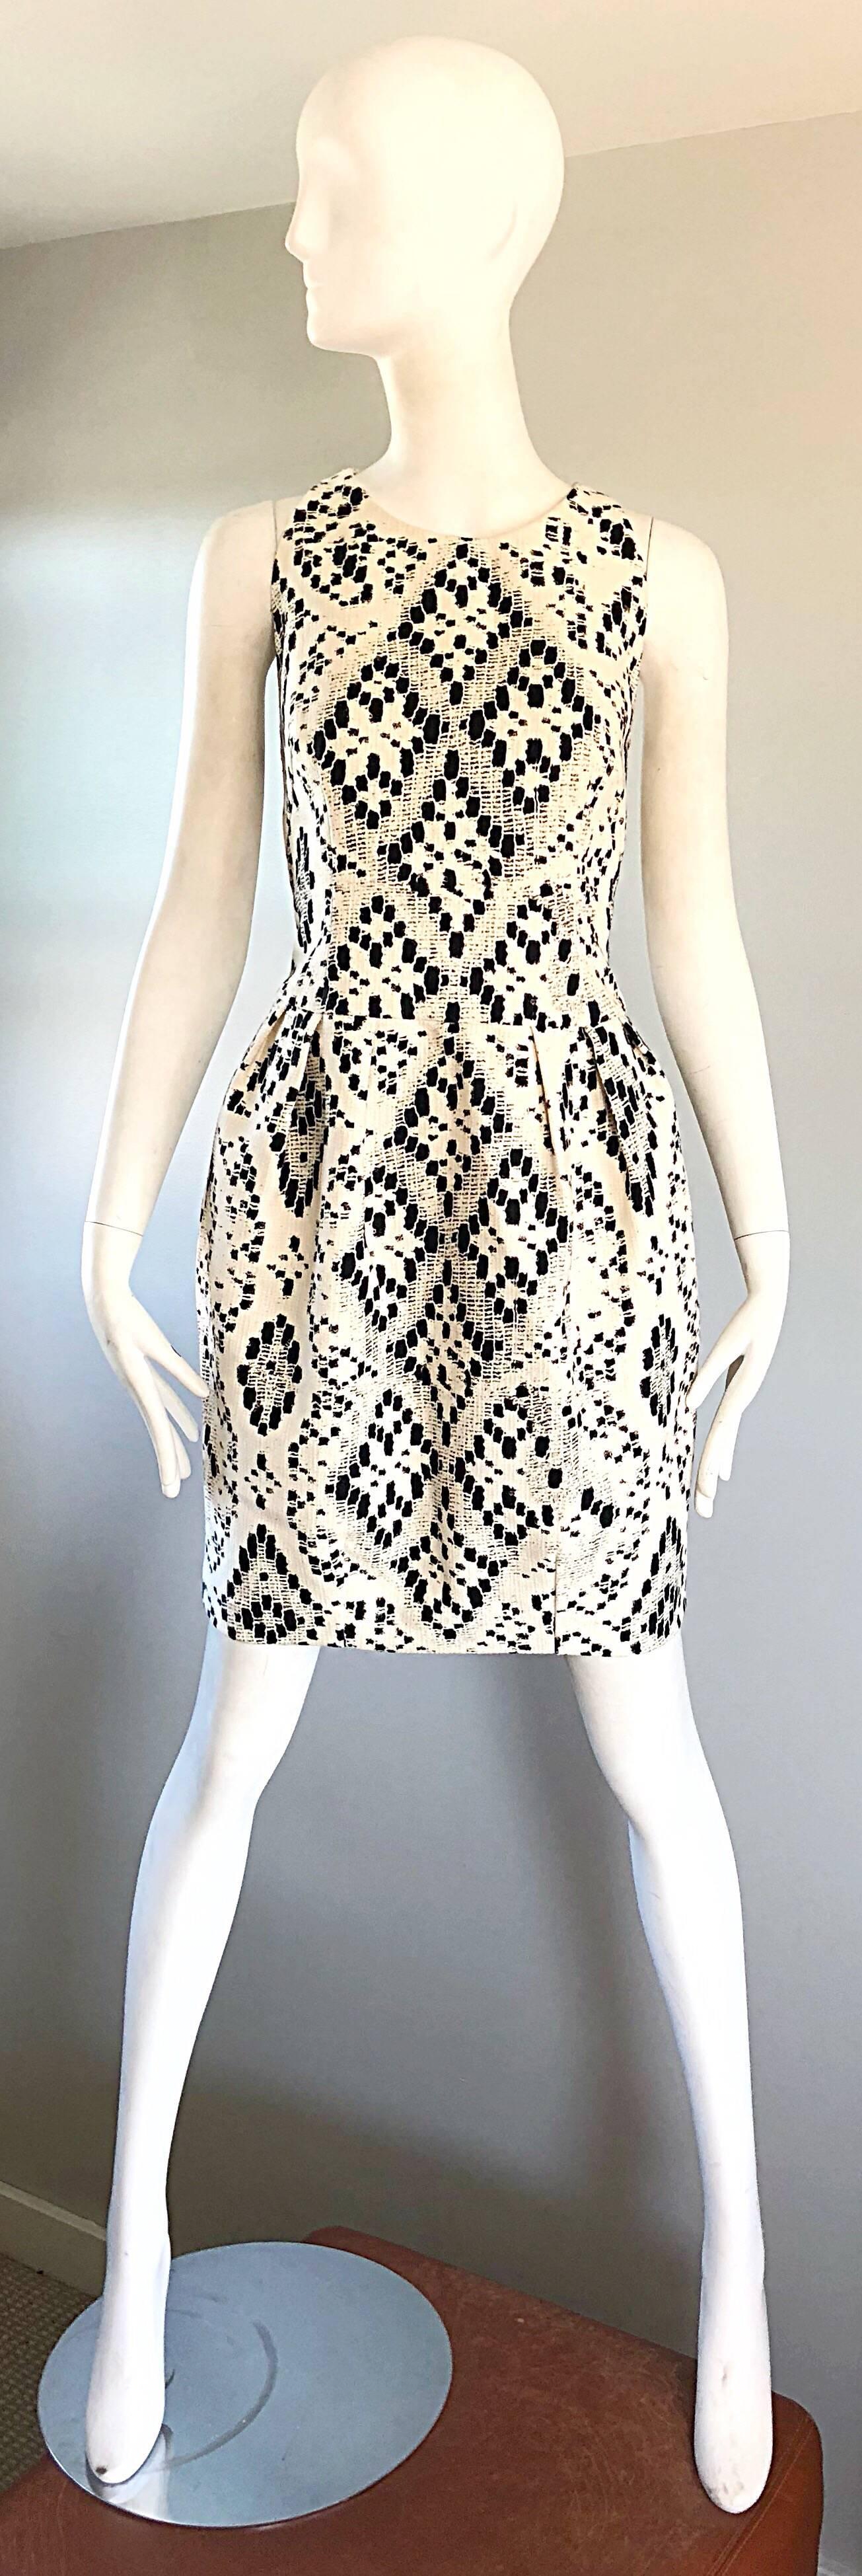 Beautiful GIAMBATTISTA VALLI Resort 2012 runway black and white geometric abstract sleeveless dress! Features a heavy texture cotton that holds shape nicely. Pockets at each side of the hips. Fitted bodice, with a flattering and forgiving full